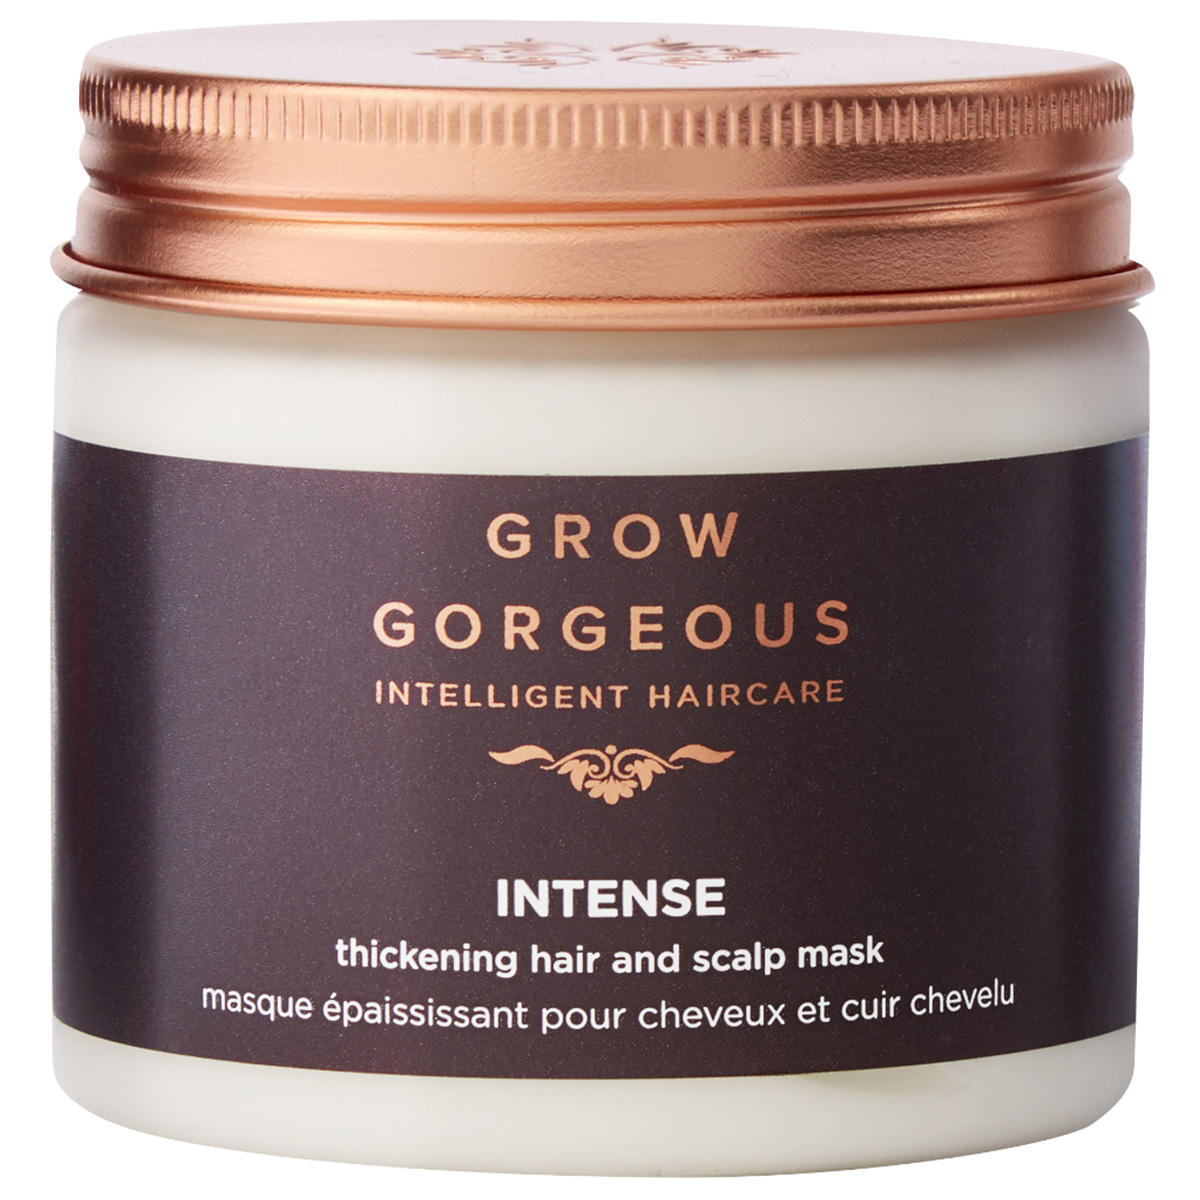 GROW GORGEOUS Intense Thickening Hair and Scalp Mask 200 ml - 1